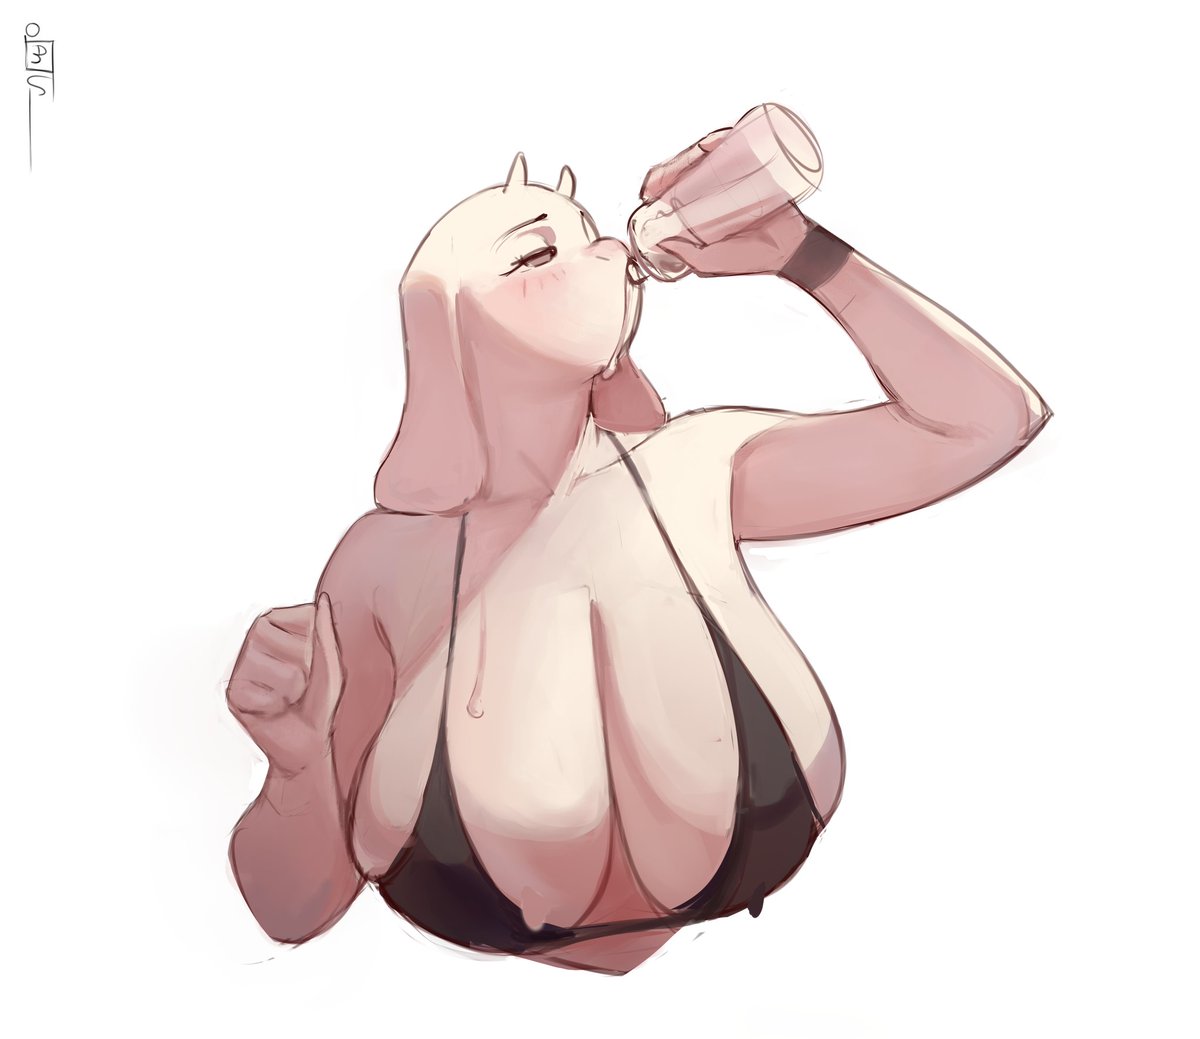 Stay hydrated, everyone! =w=''